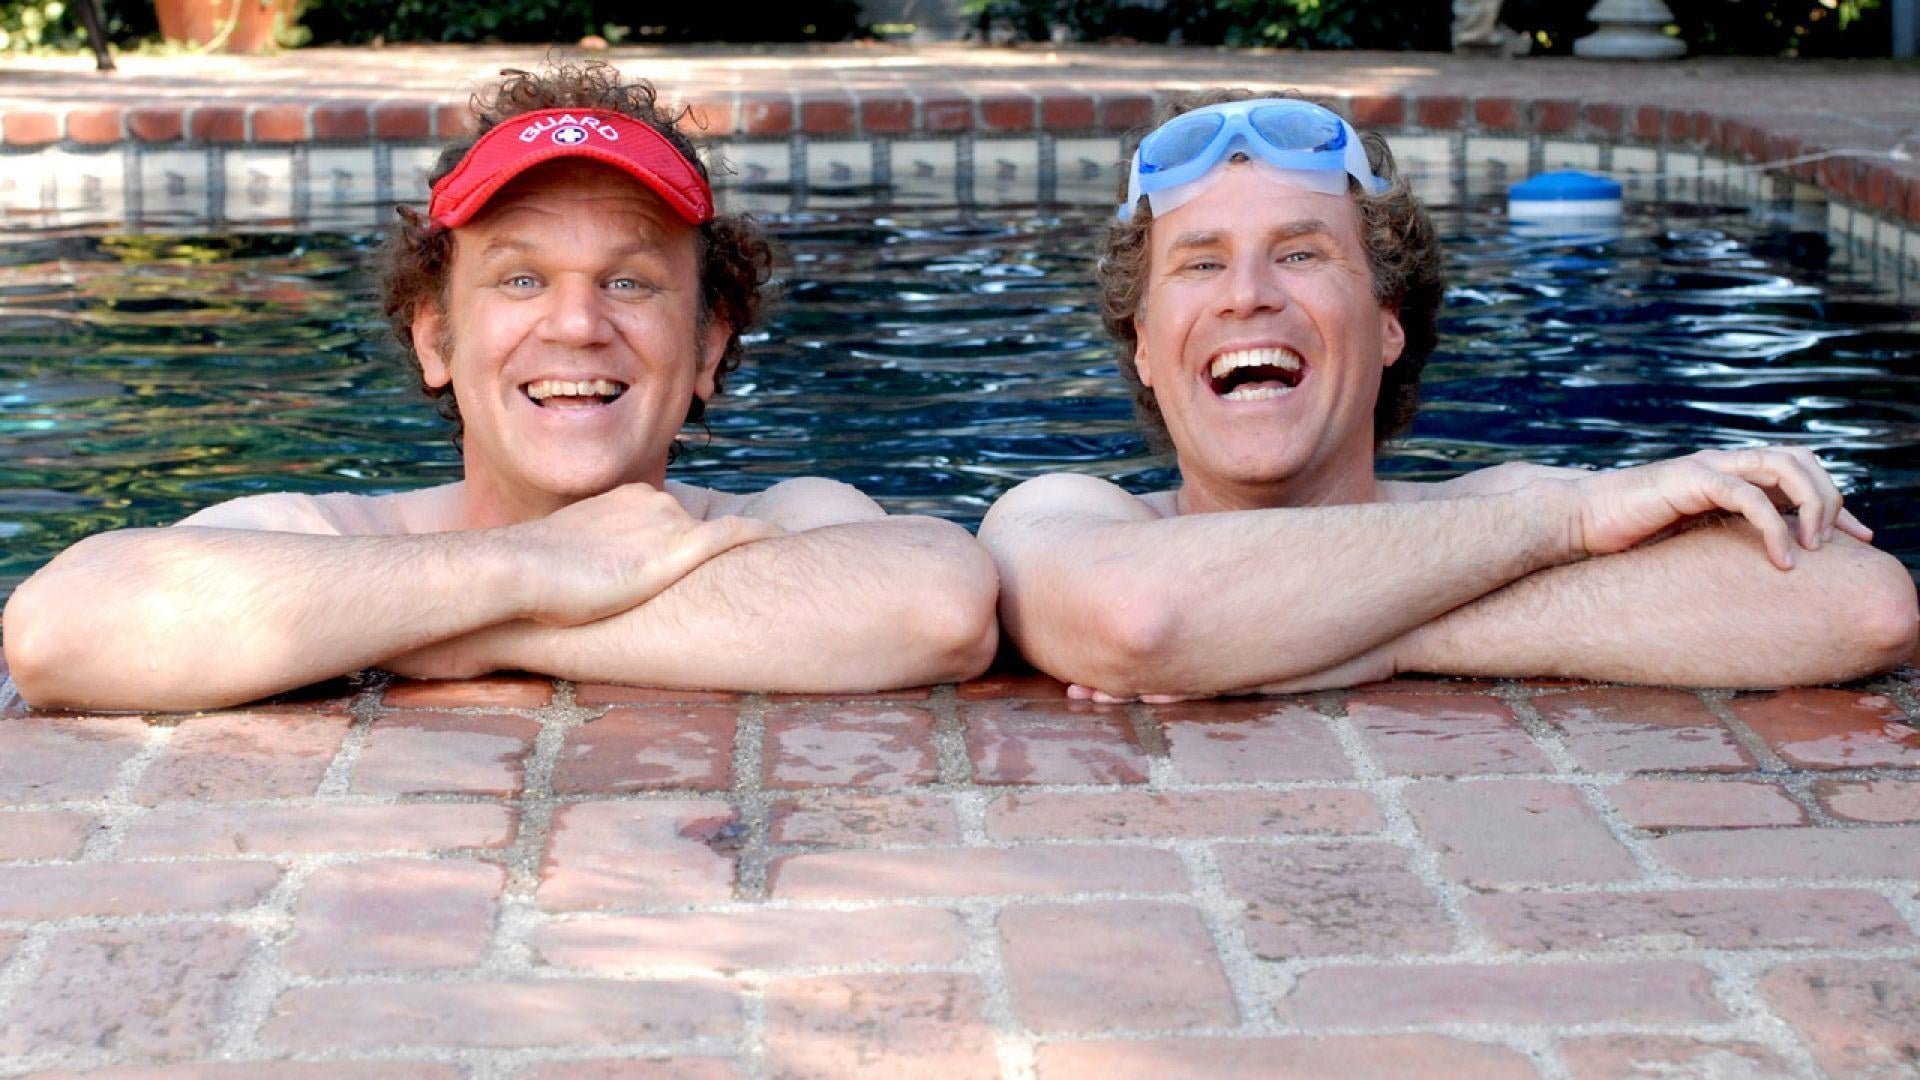 Step Brothers 2008 123movies